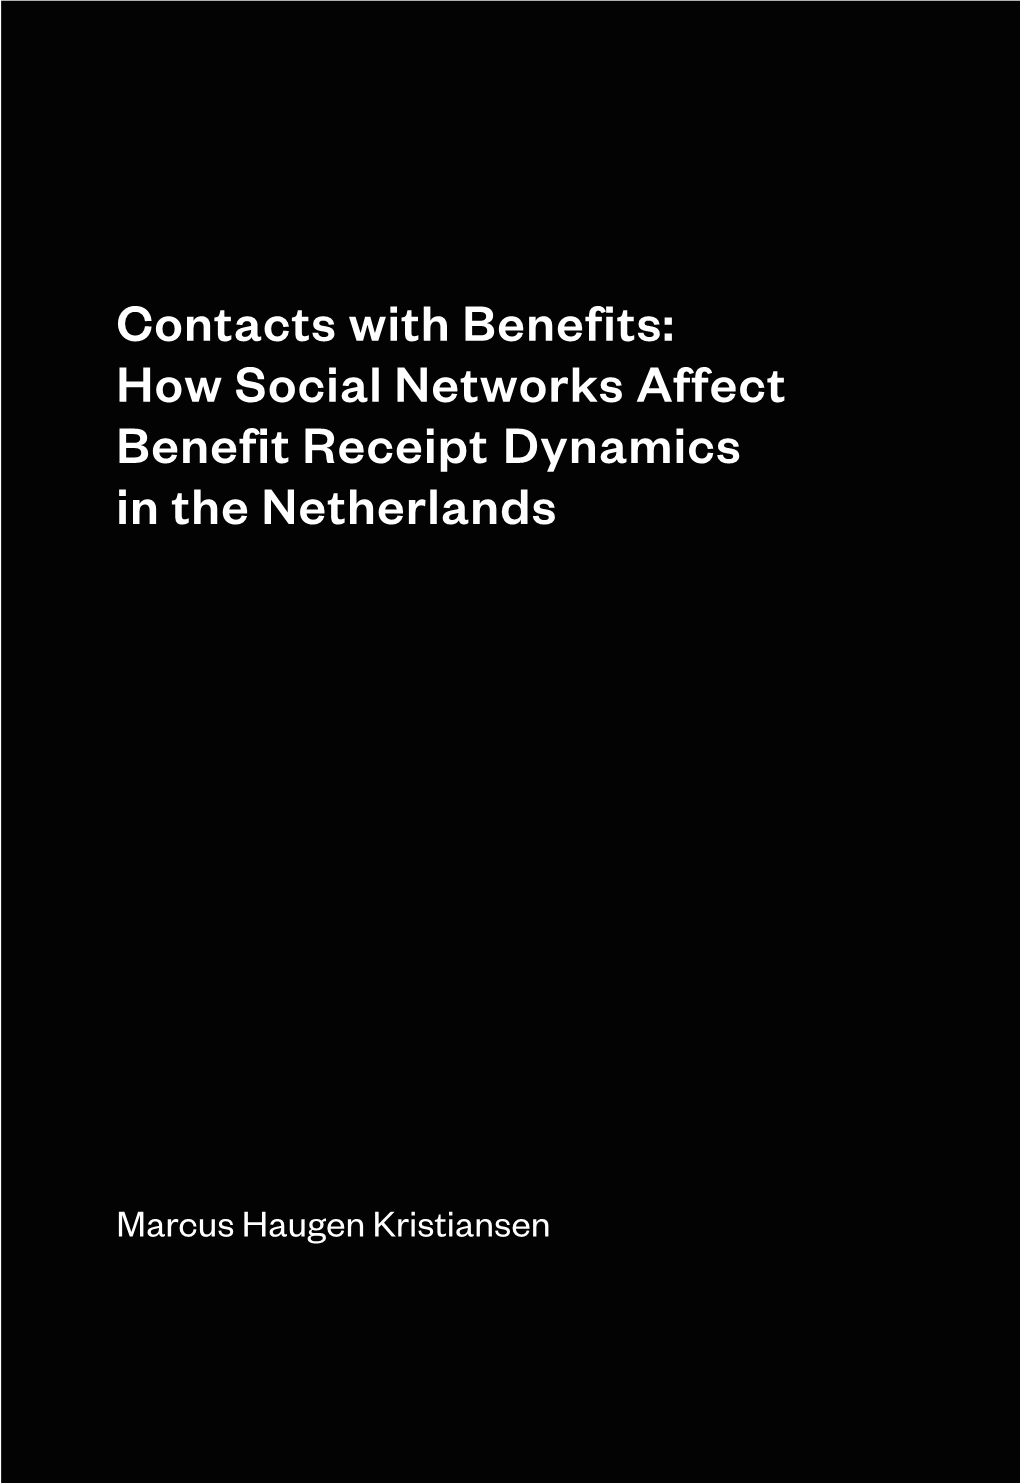 How Social Networks Affect Benefit Receipt Dynamics in the Netherlands